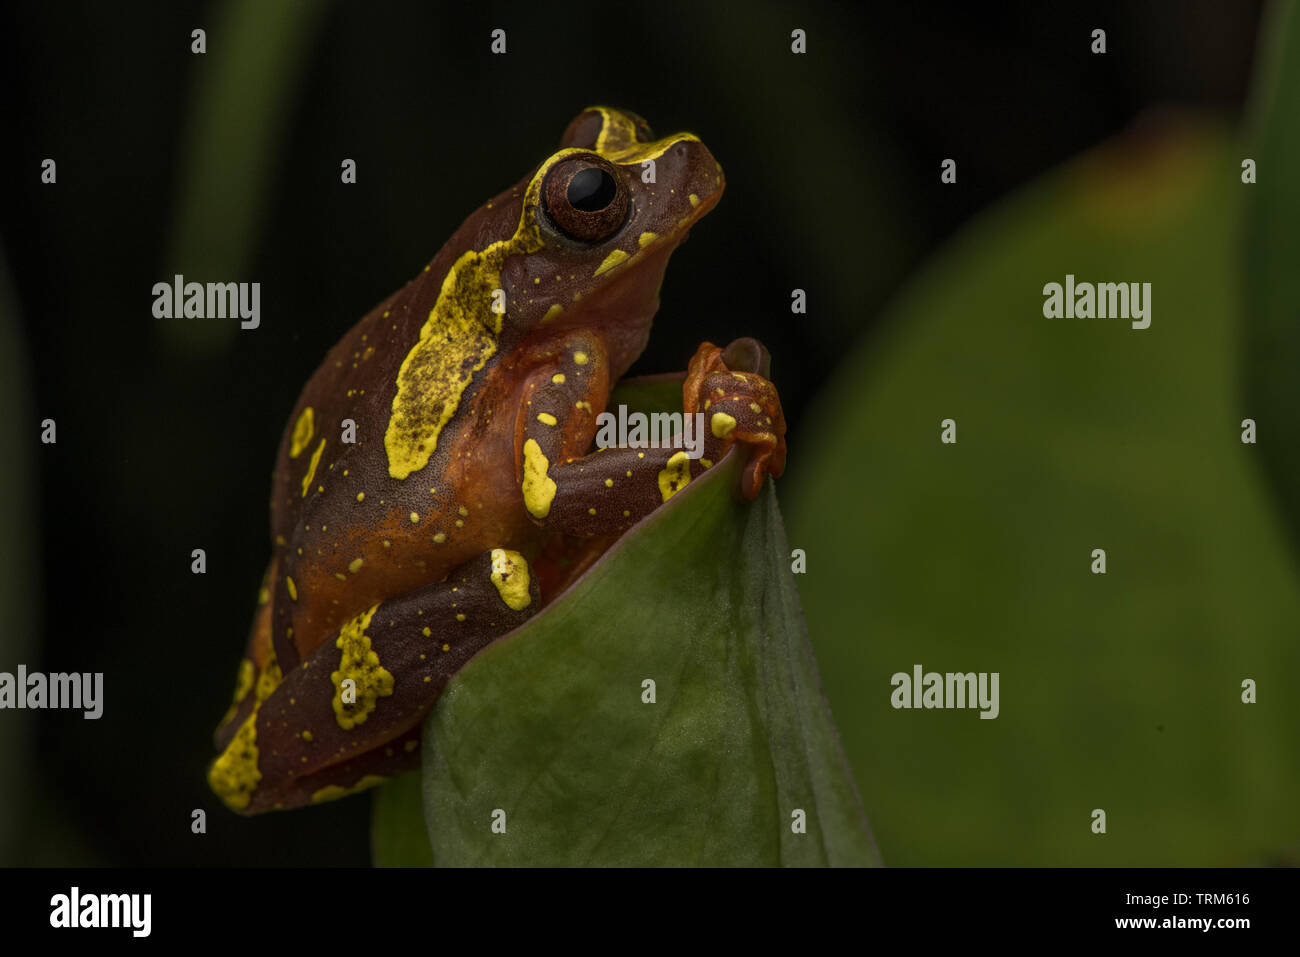 Dendropsophus sarayacuensis, the Sarayacu Treefrog from Yasuni national park in the Ecuadorian Amazon. These small frogs are also known as clown frogs. Stock Photo